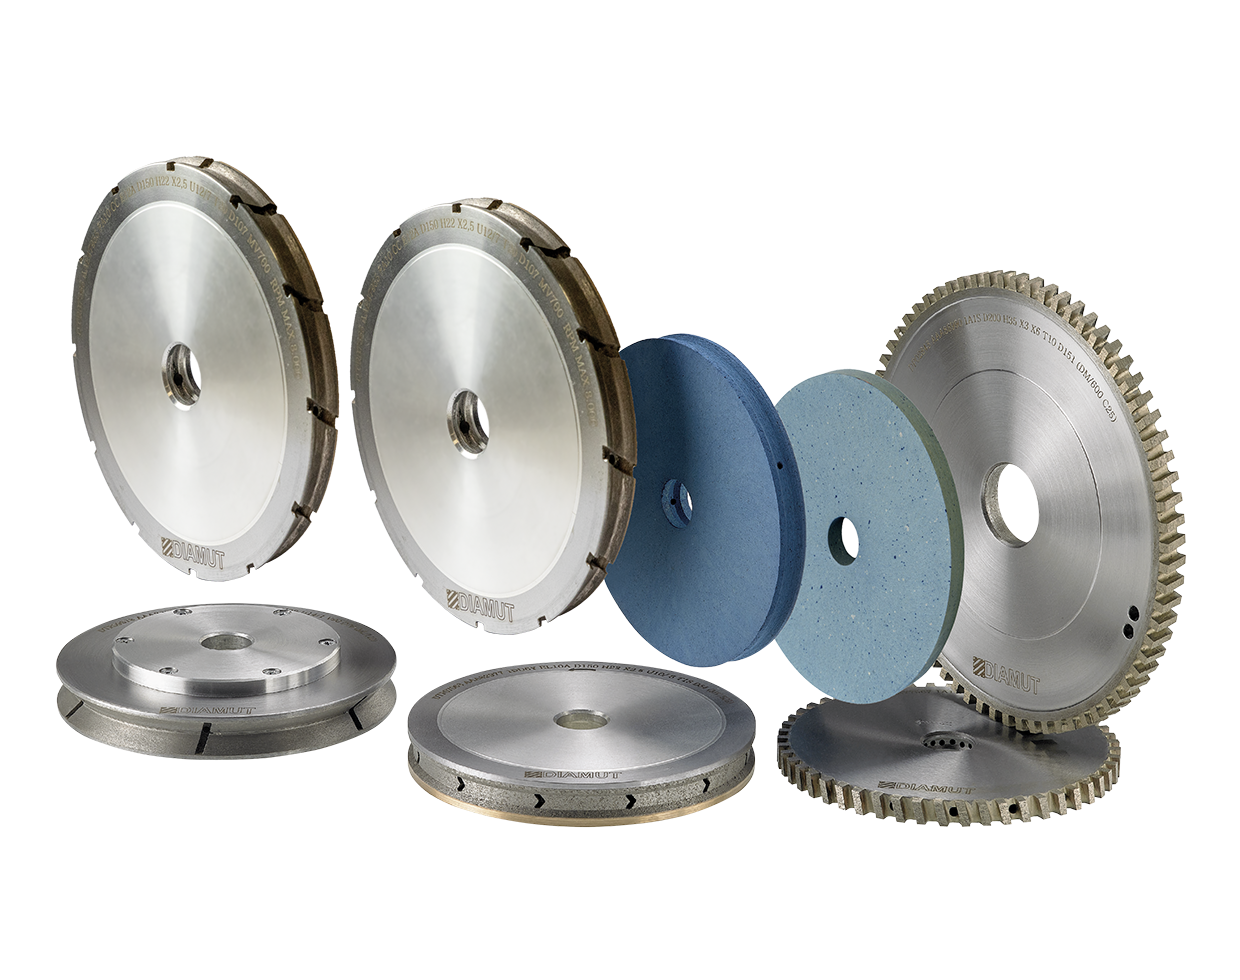 Peripheral grinding wheels and polishing wheels for vertical machines: Photo 1